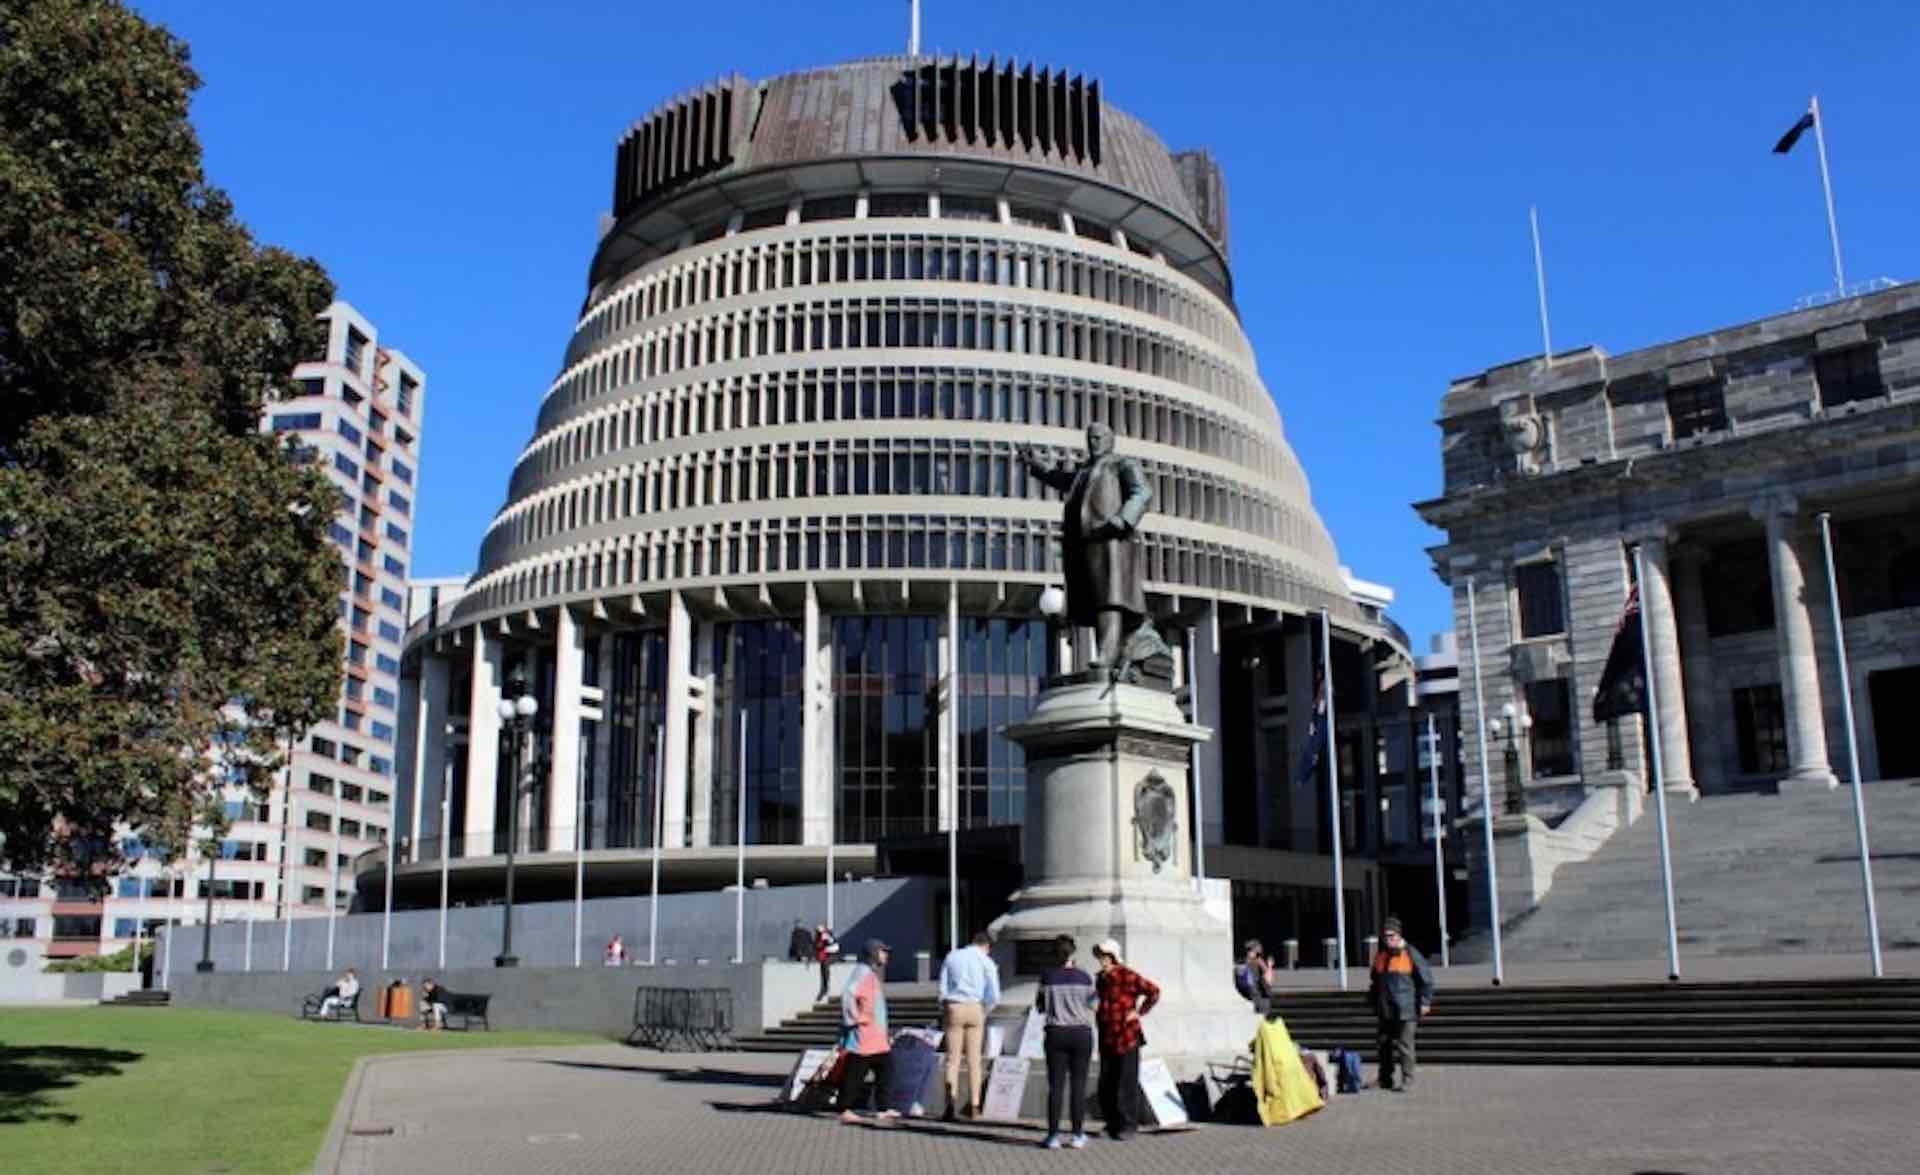 Voting age of 18 ruled discriminatory by a New Zealand court